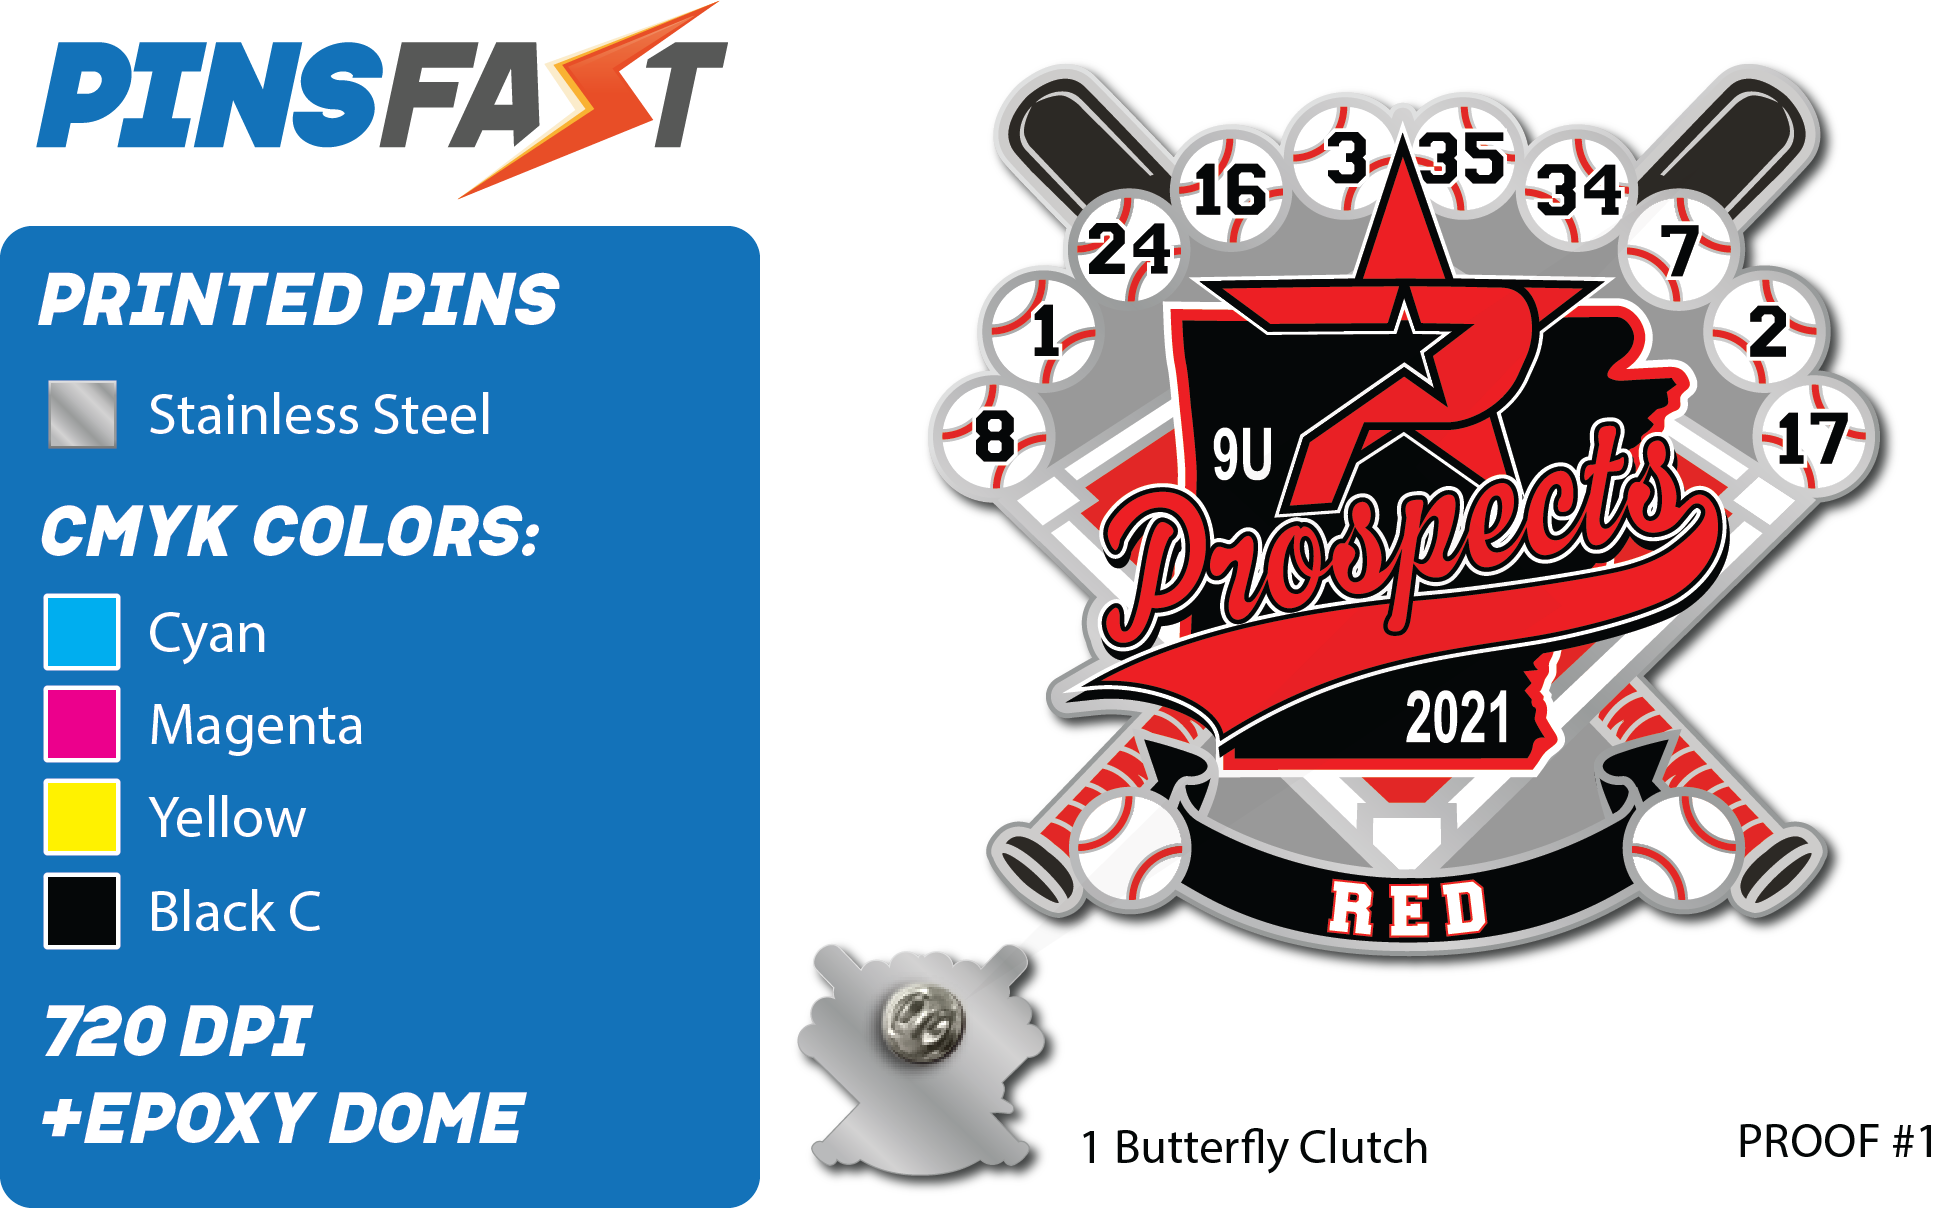 Prospects Red Trading pins